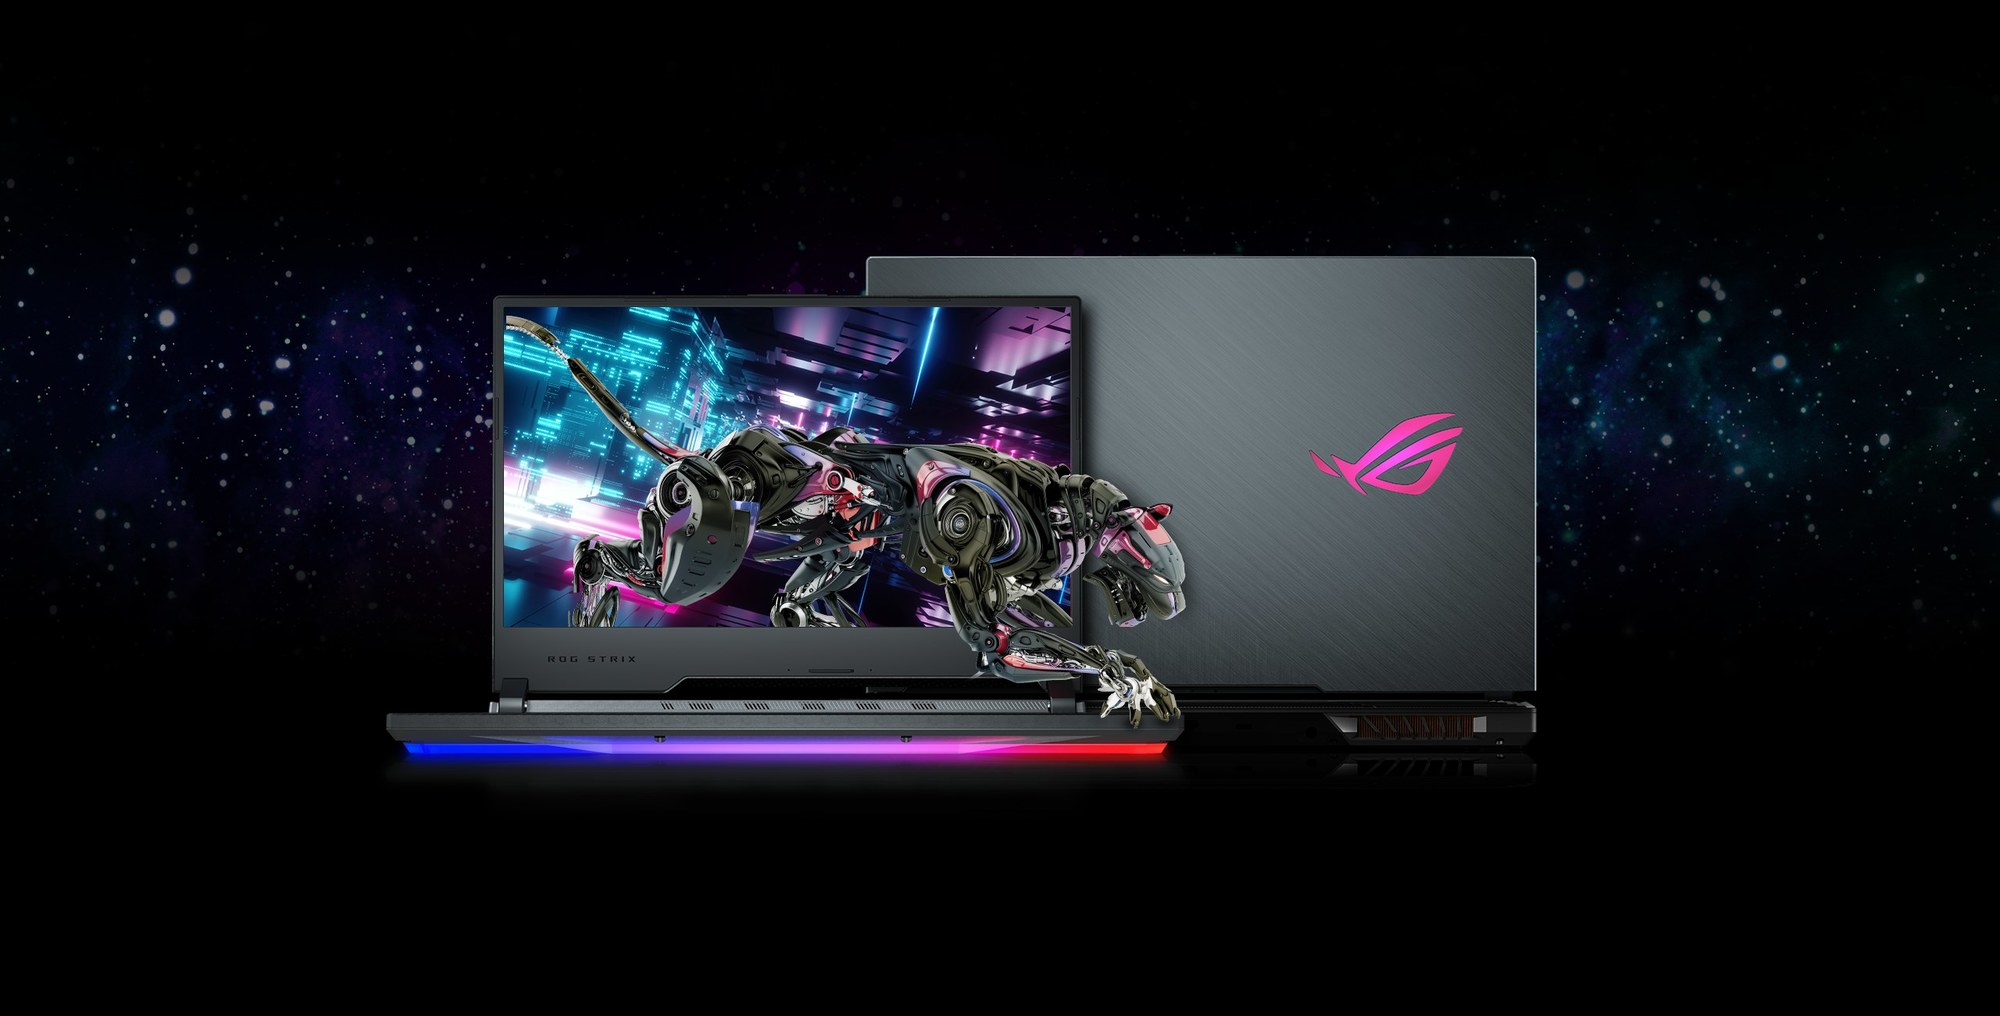 ASUS announces a lineup of new and refreshed ROG gaming laptops 85608f01b5a3405166d4c631df6d3081.jpg